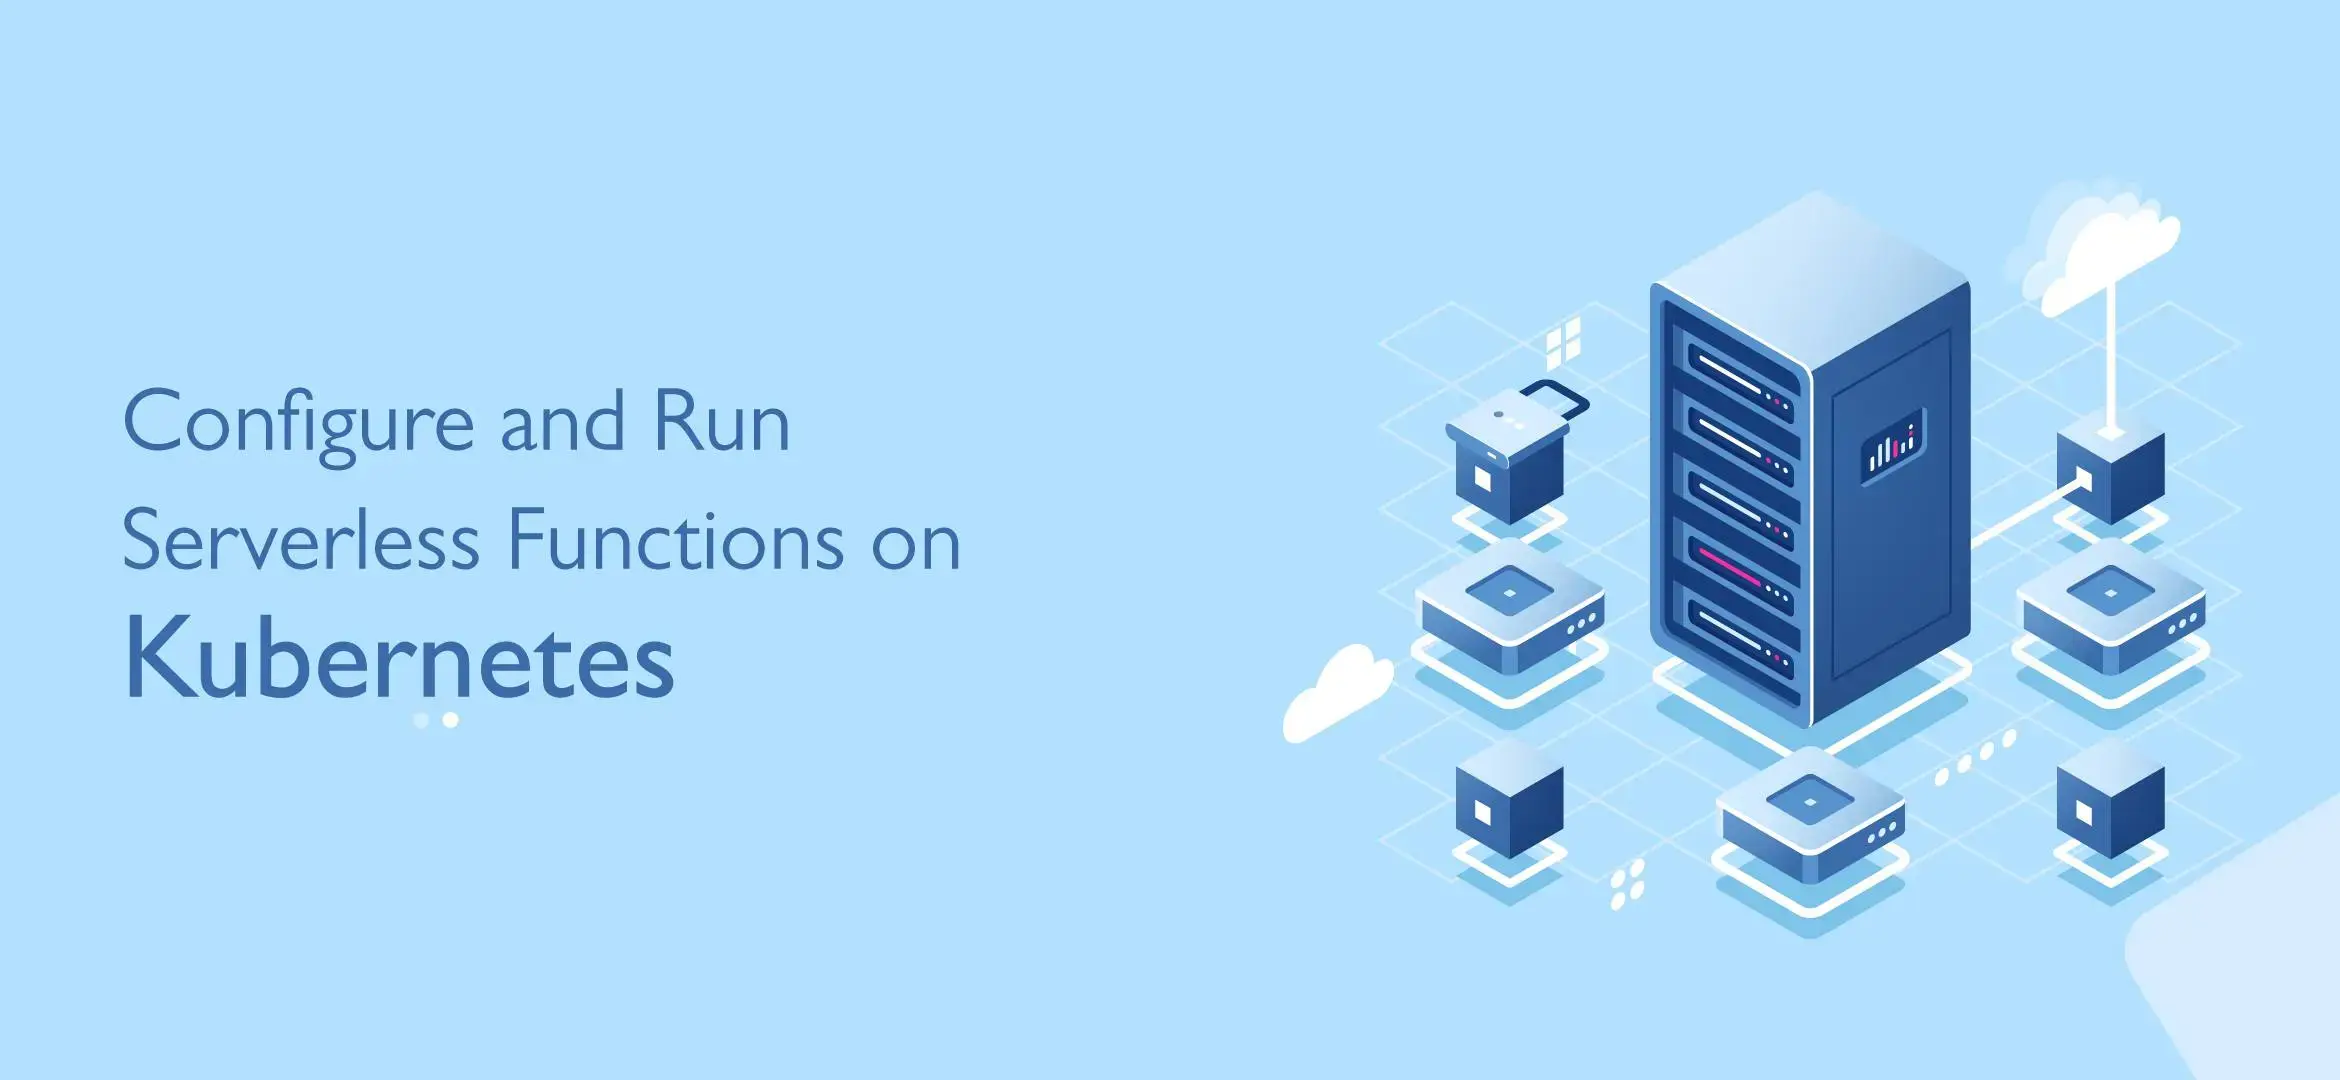 Configure and Run Serverless Functions on Kubernetes